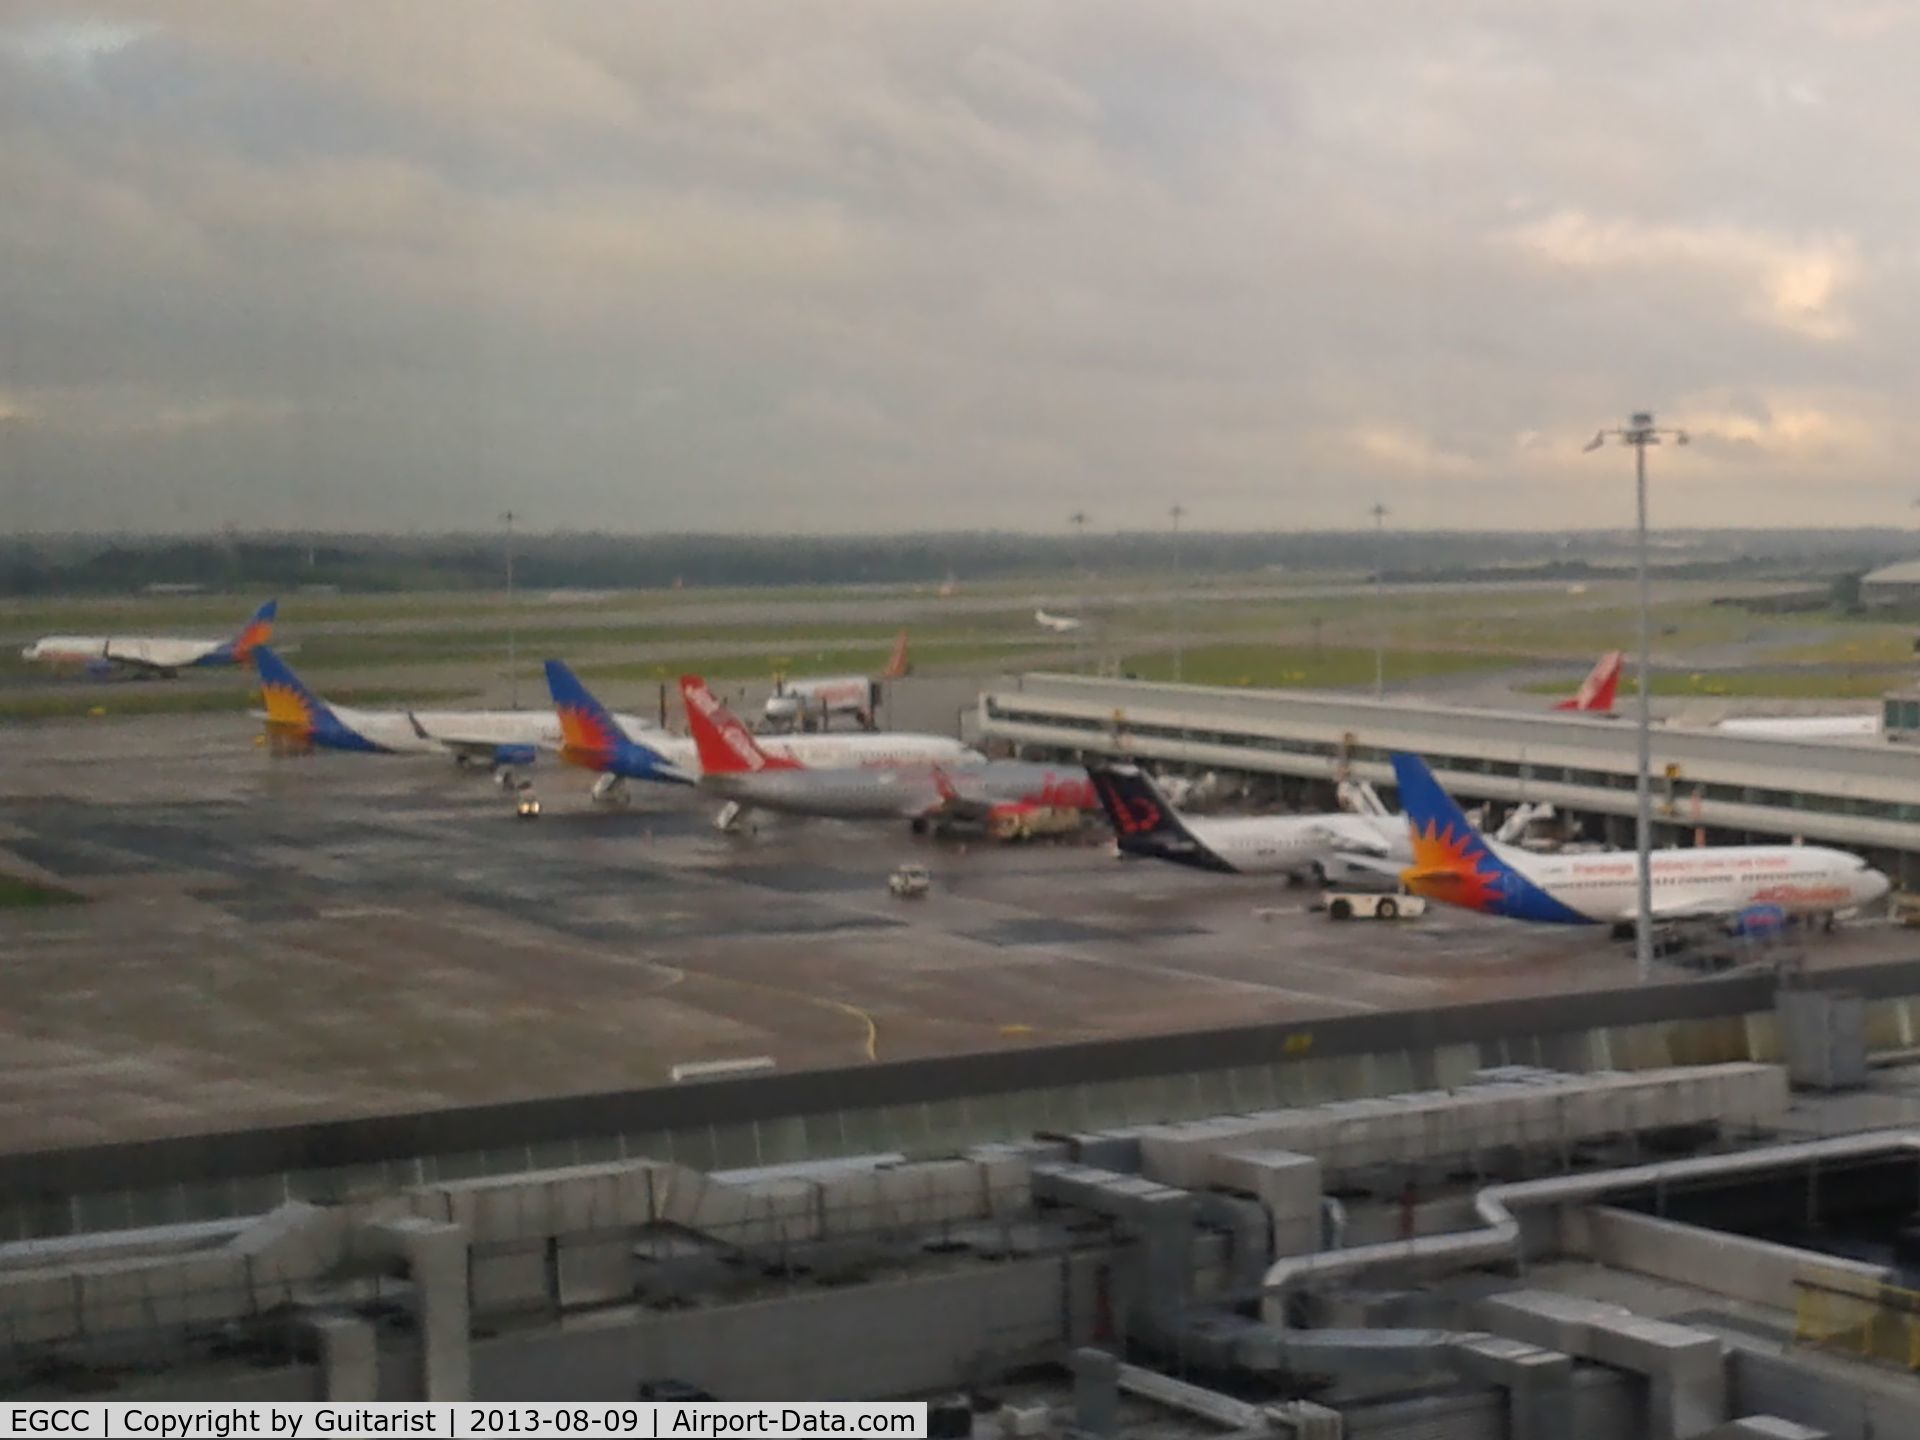 Manchester Airport, Manchester, England United Kingdom (EGCC) - Friday morning from an office window.